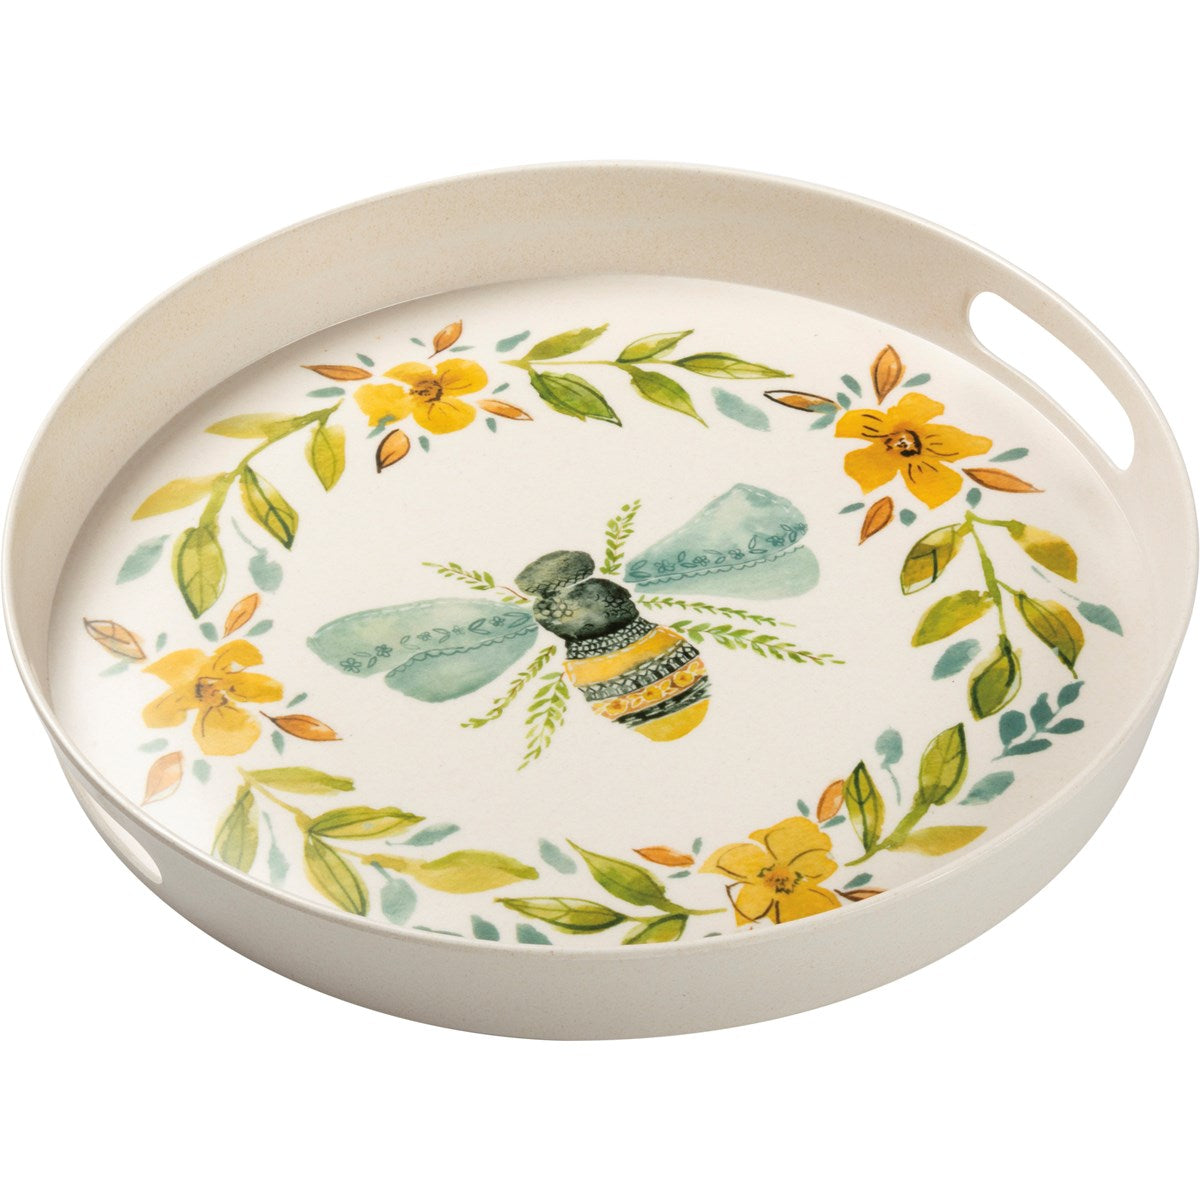 Set of 2 Bee Home Sweet Home Round Melamine Trays